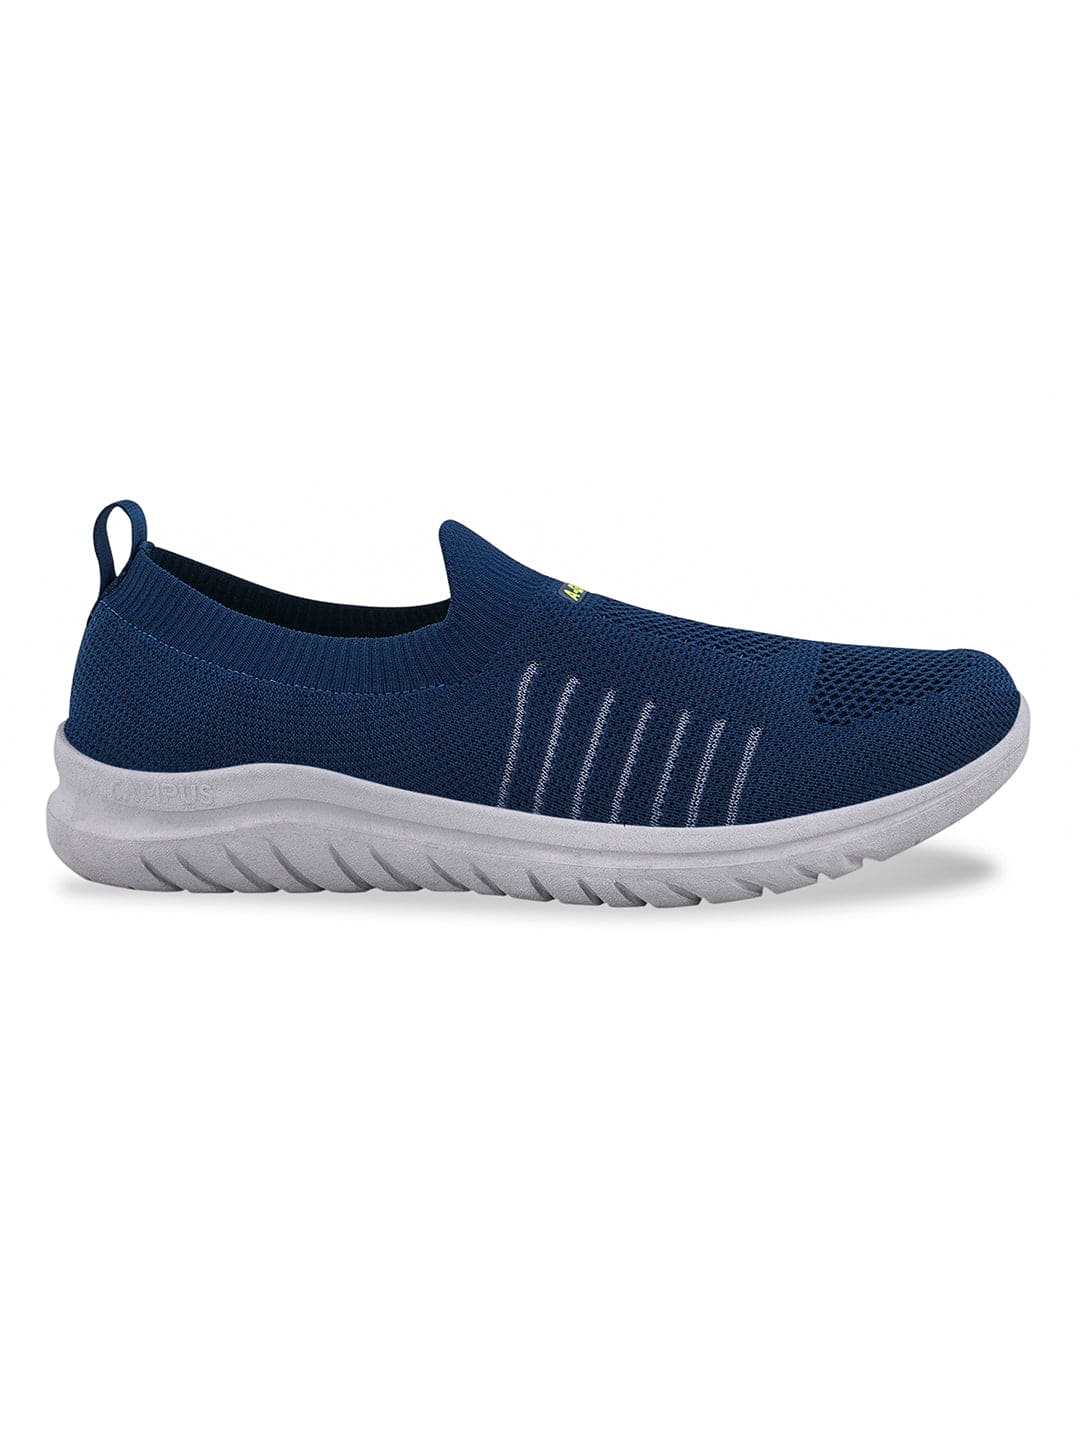 Buy Casual Shoes For Men: Agr-2-Mod-Blu | Campus Shoes